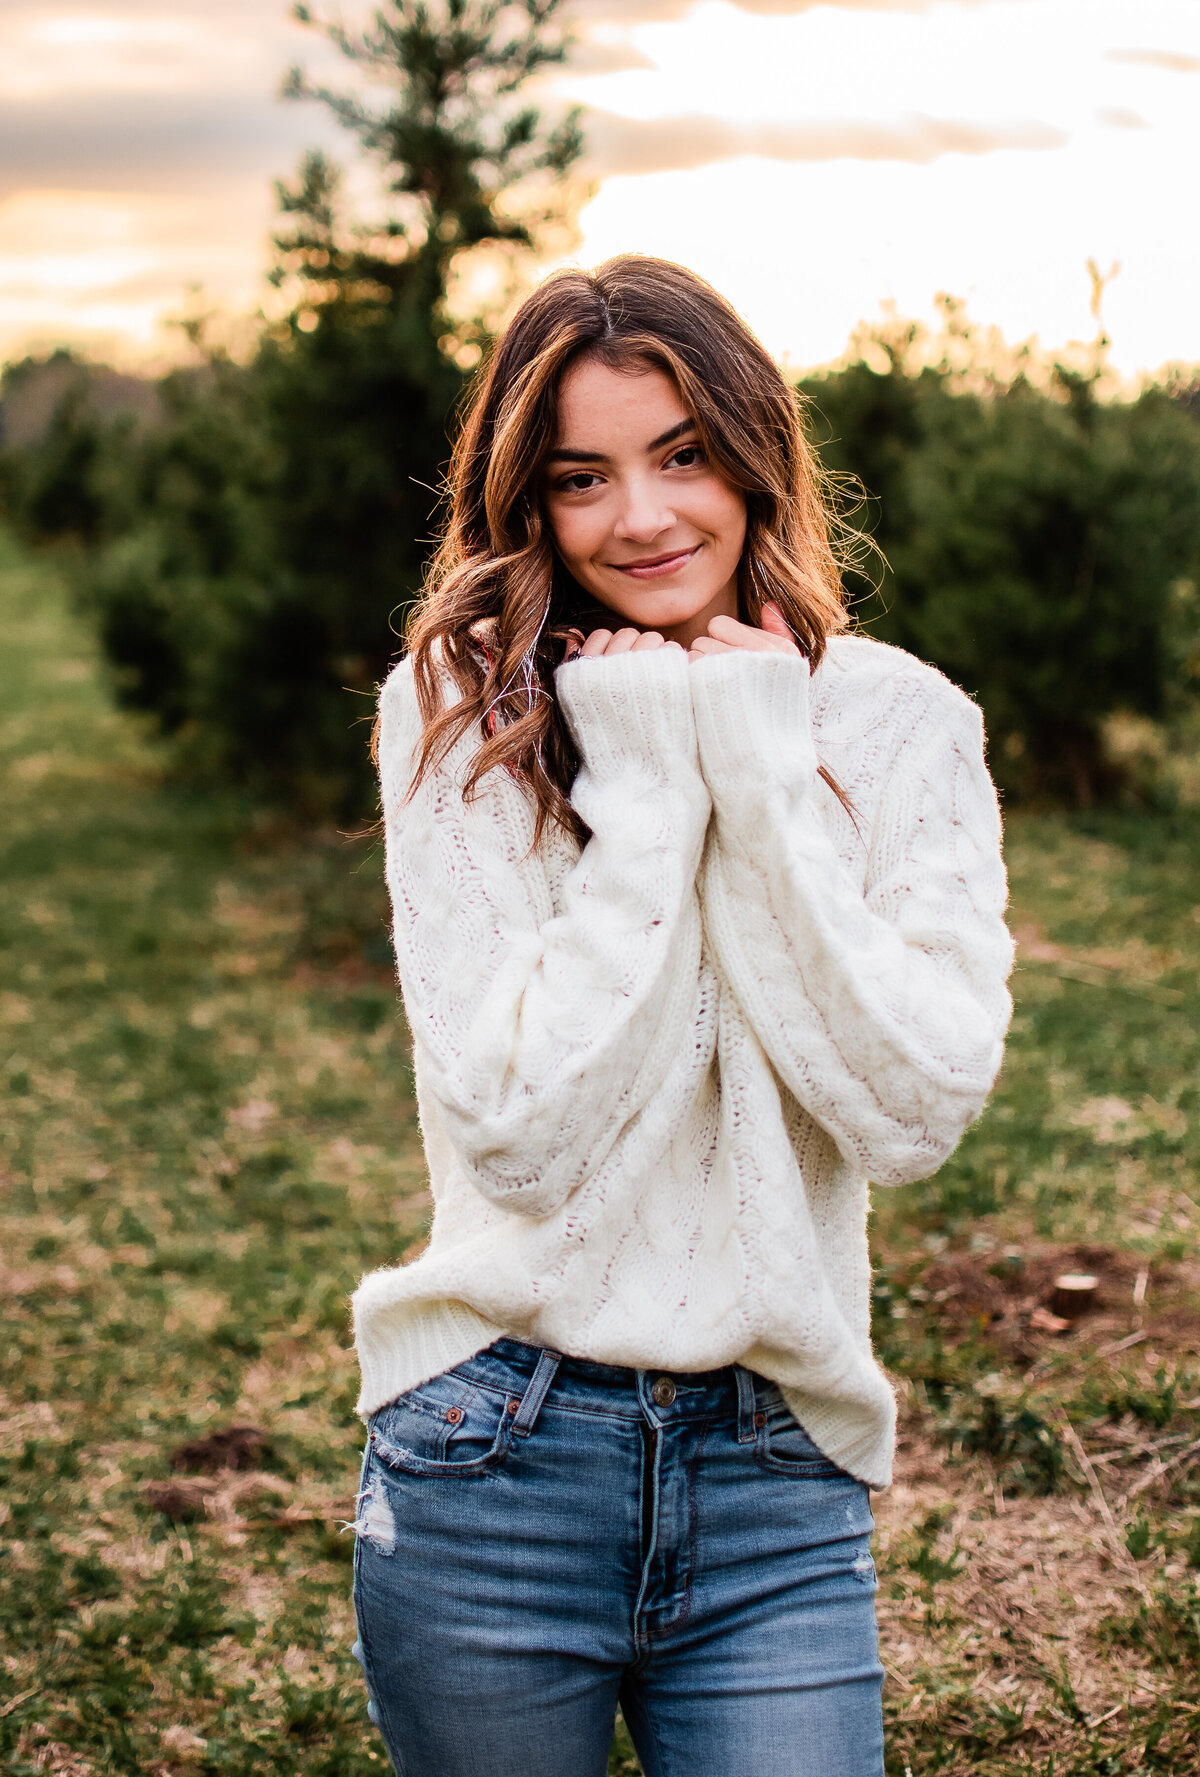 A high school senior wearing a white sweater poses at a Christmas tree farm in Manvel, TX.